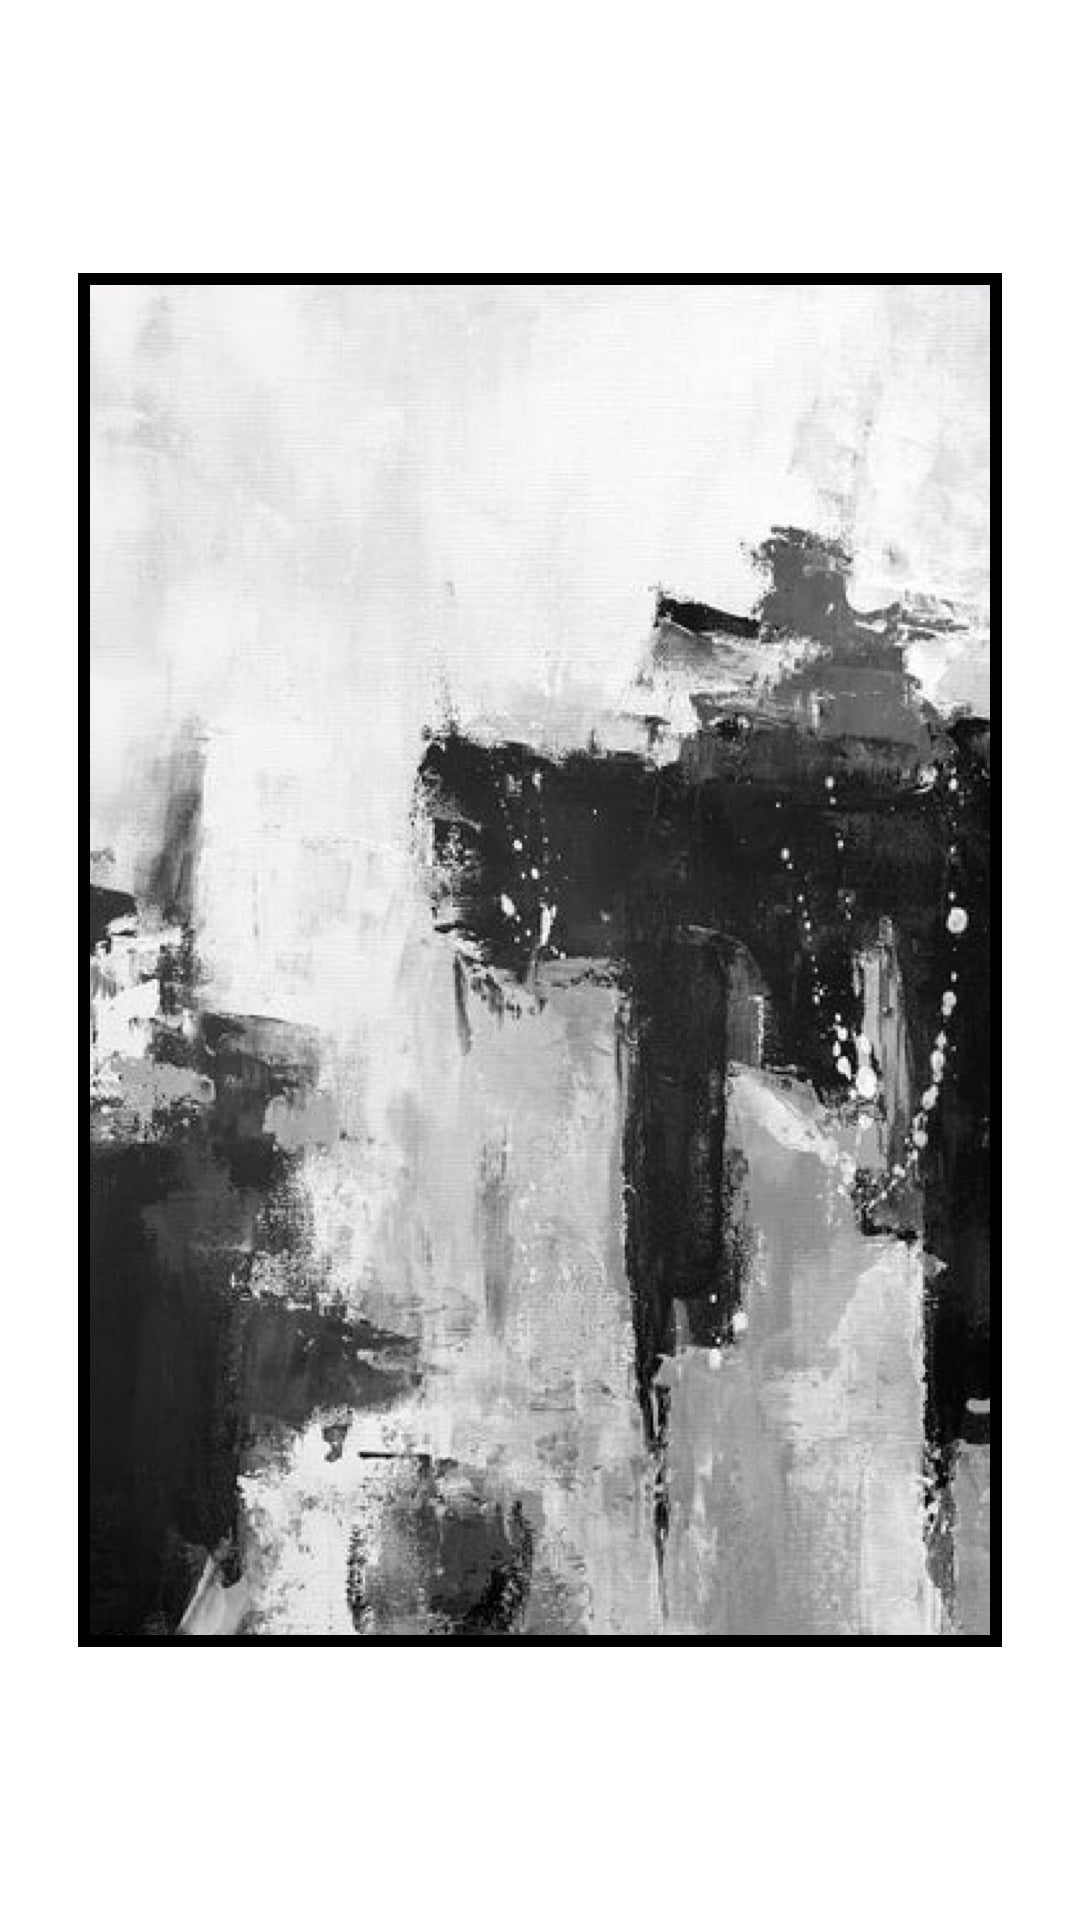 Black, white and grey abstract canvas set of 3 - THE WALL STYLIST